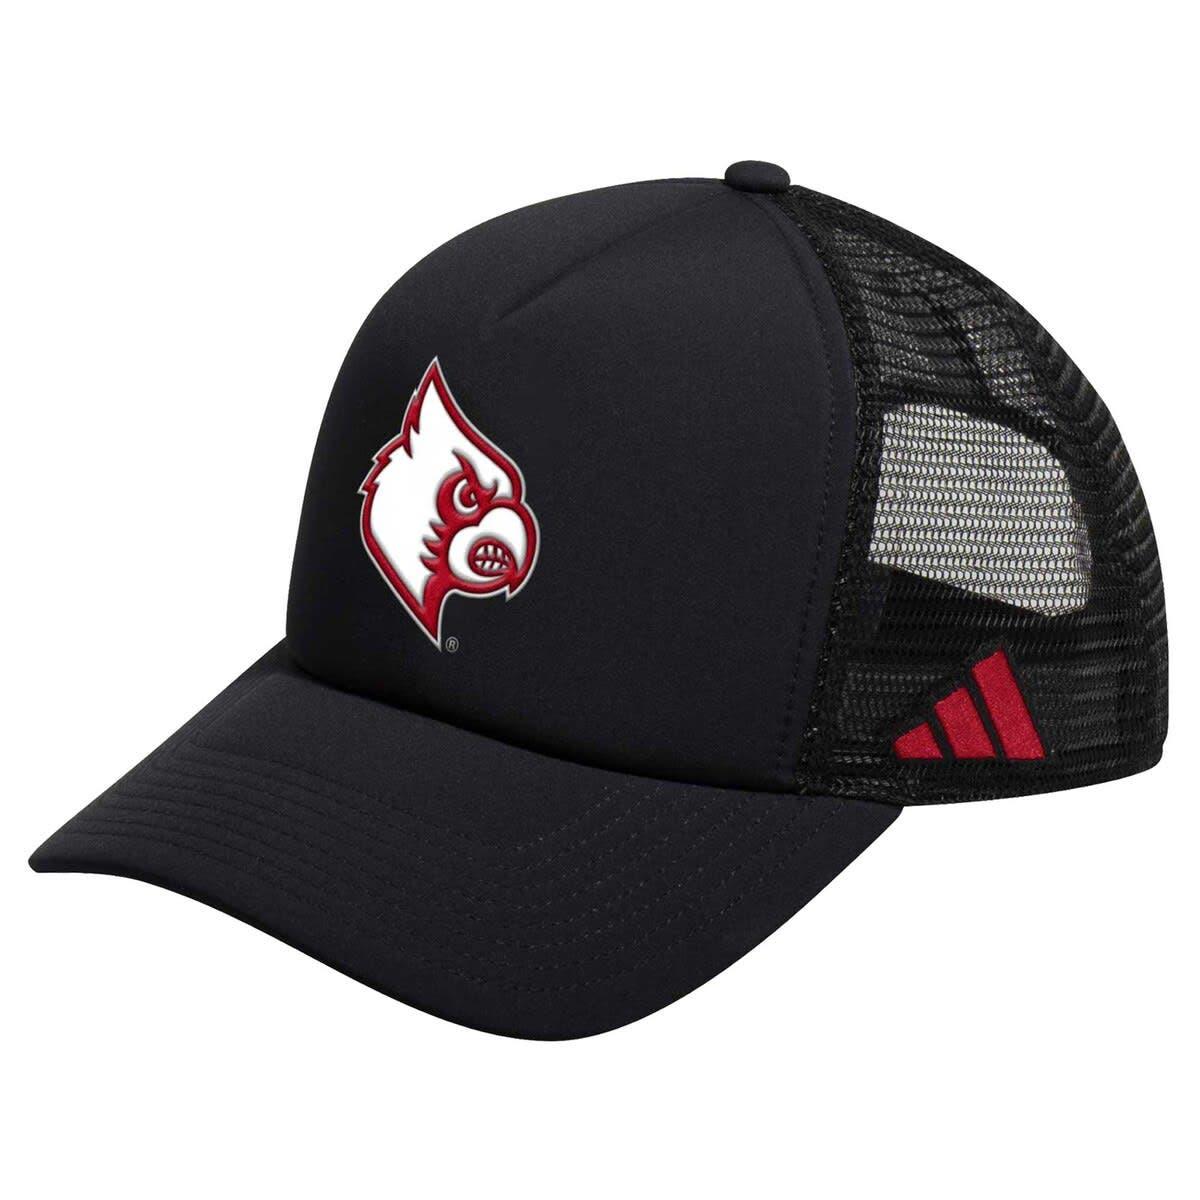 adidas Men's adidas Gray Louisville Cardinals On-Field Baseball Fitted Hat